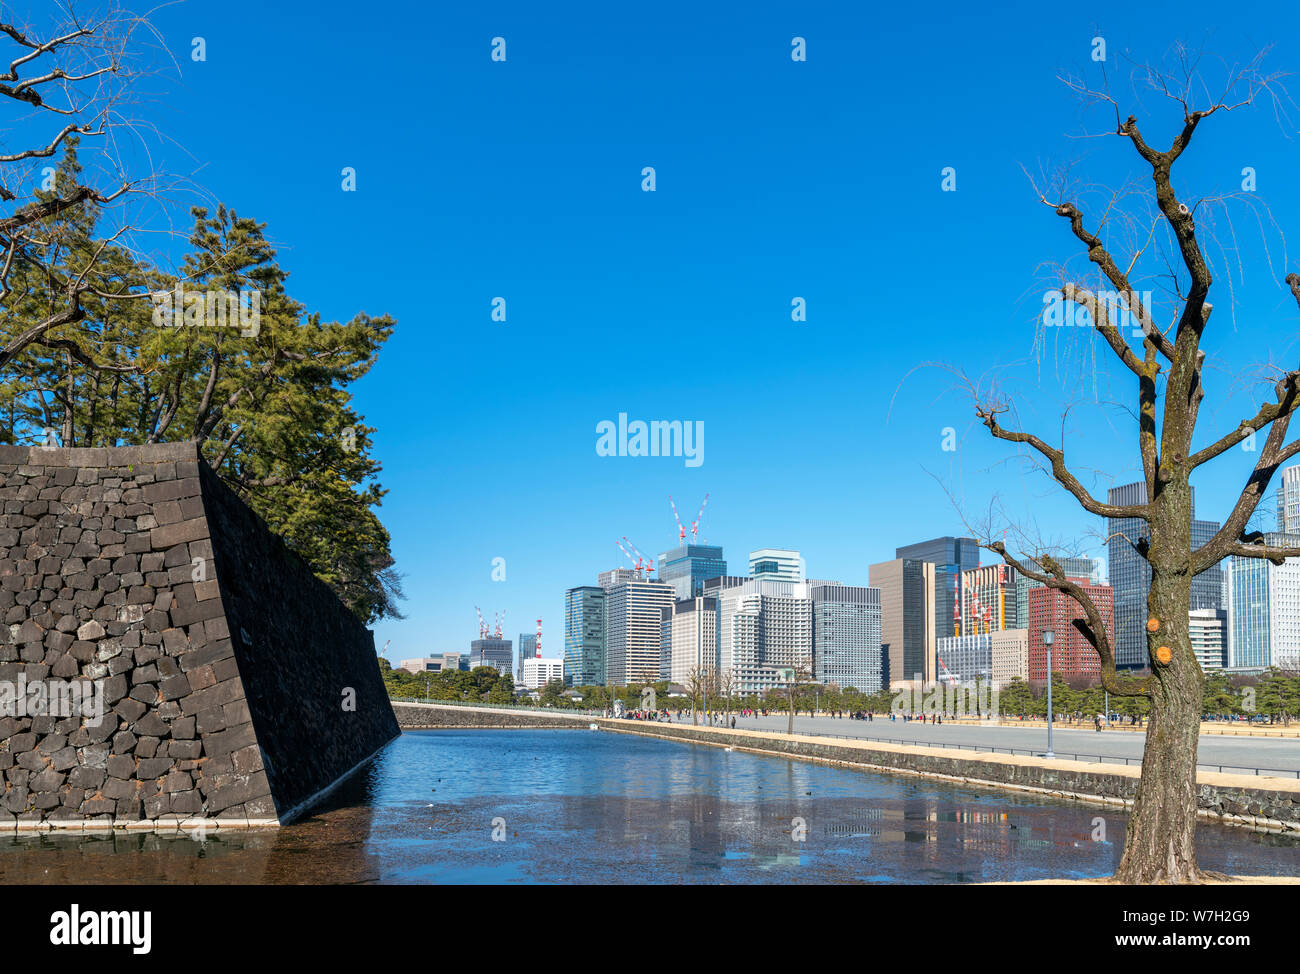 Skyscrapers in the Marunouchi district with the walls of the Imperial Palace in the foreground, Tokyo, Japan Stock Photo